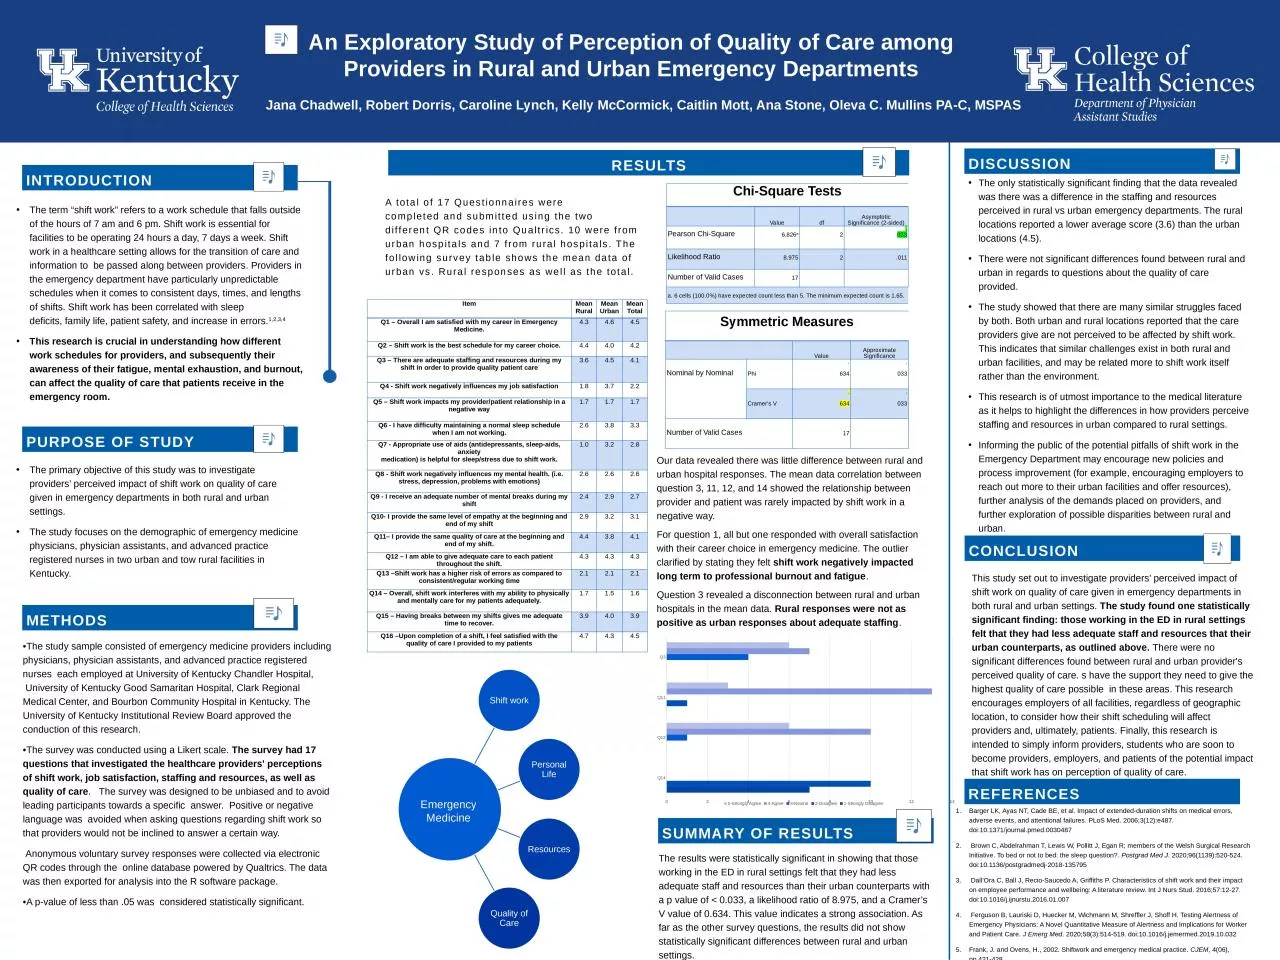 The primary objective of this study was to investigate providers’ perceived impact